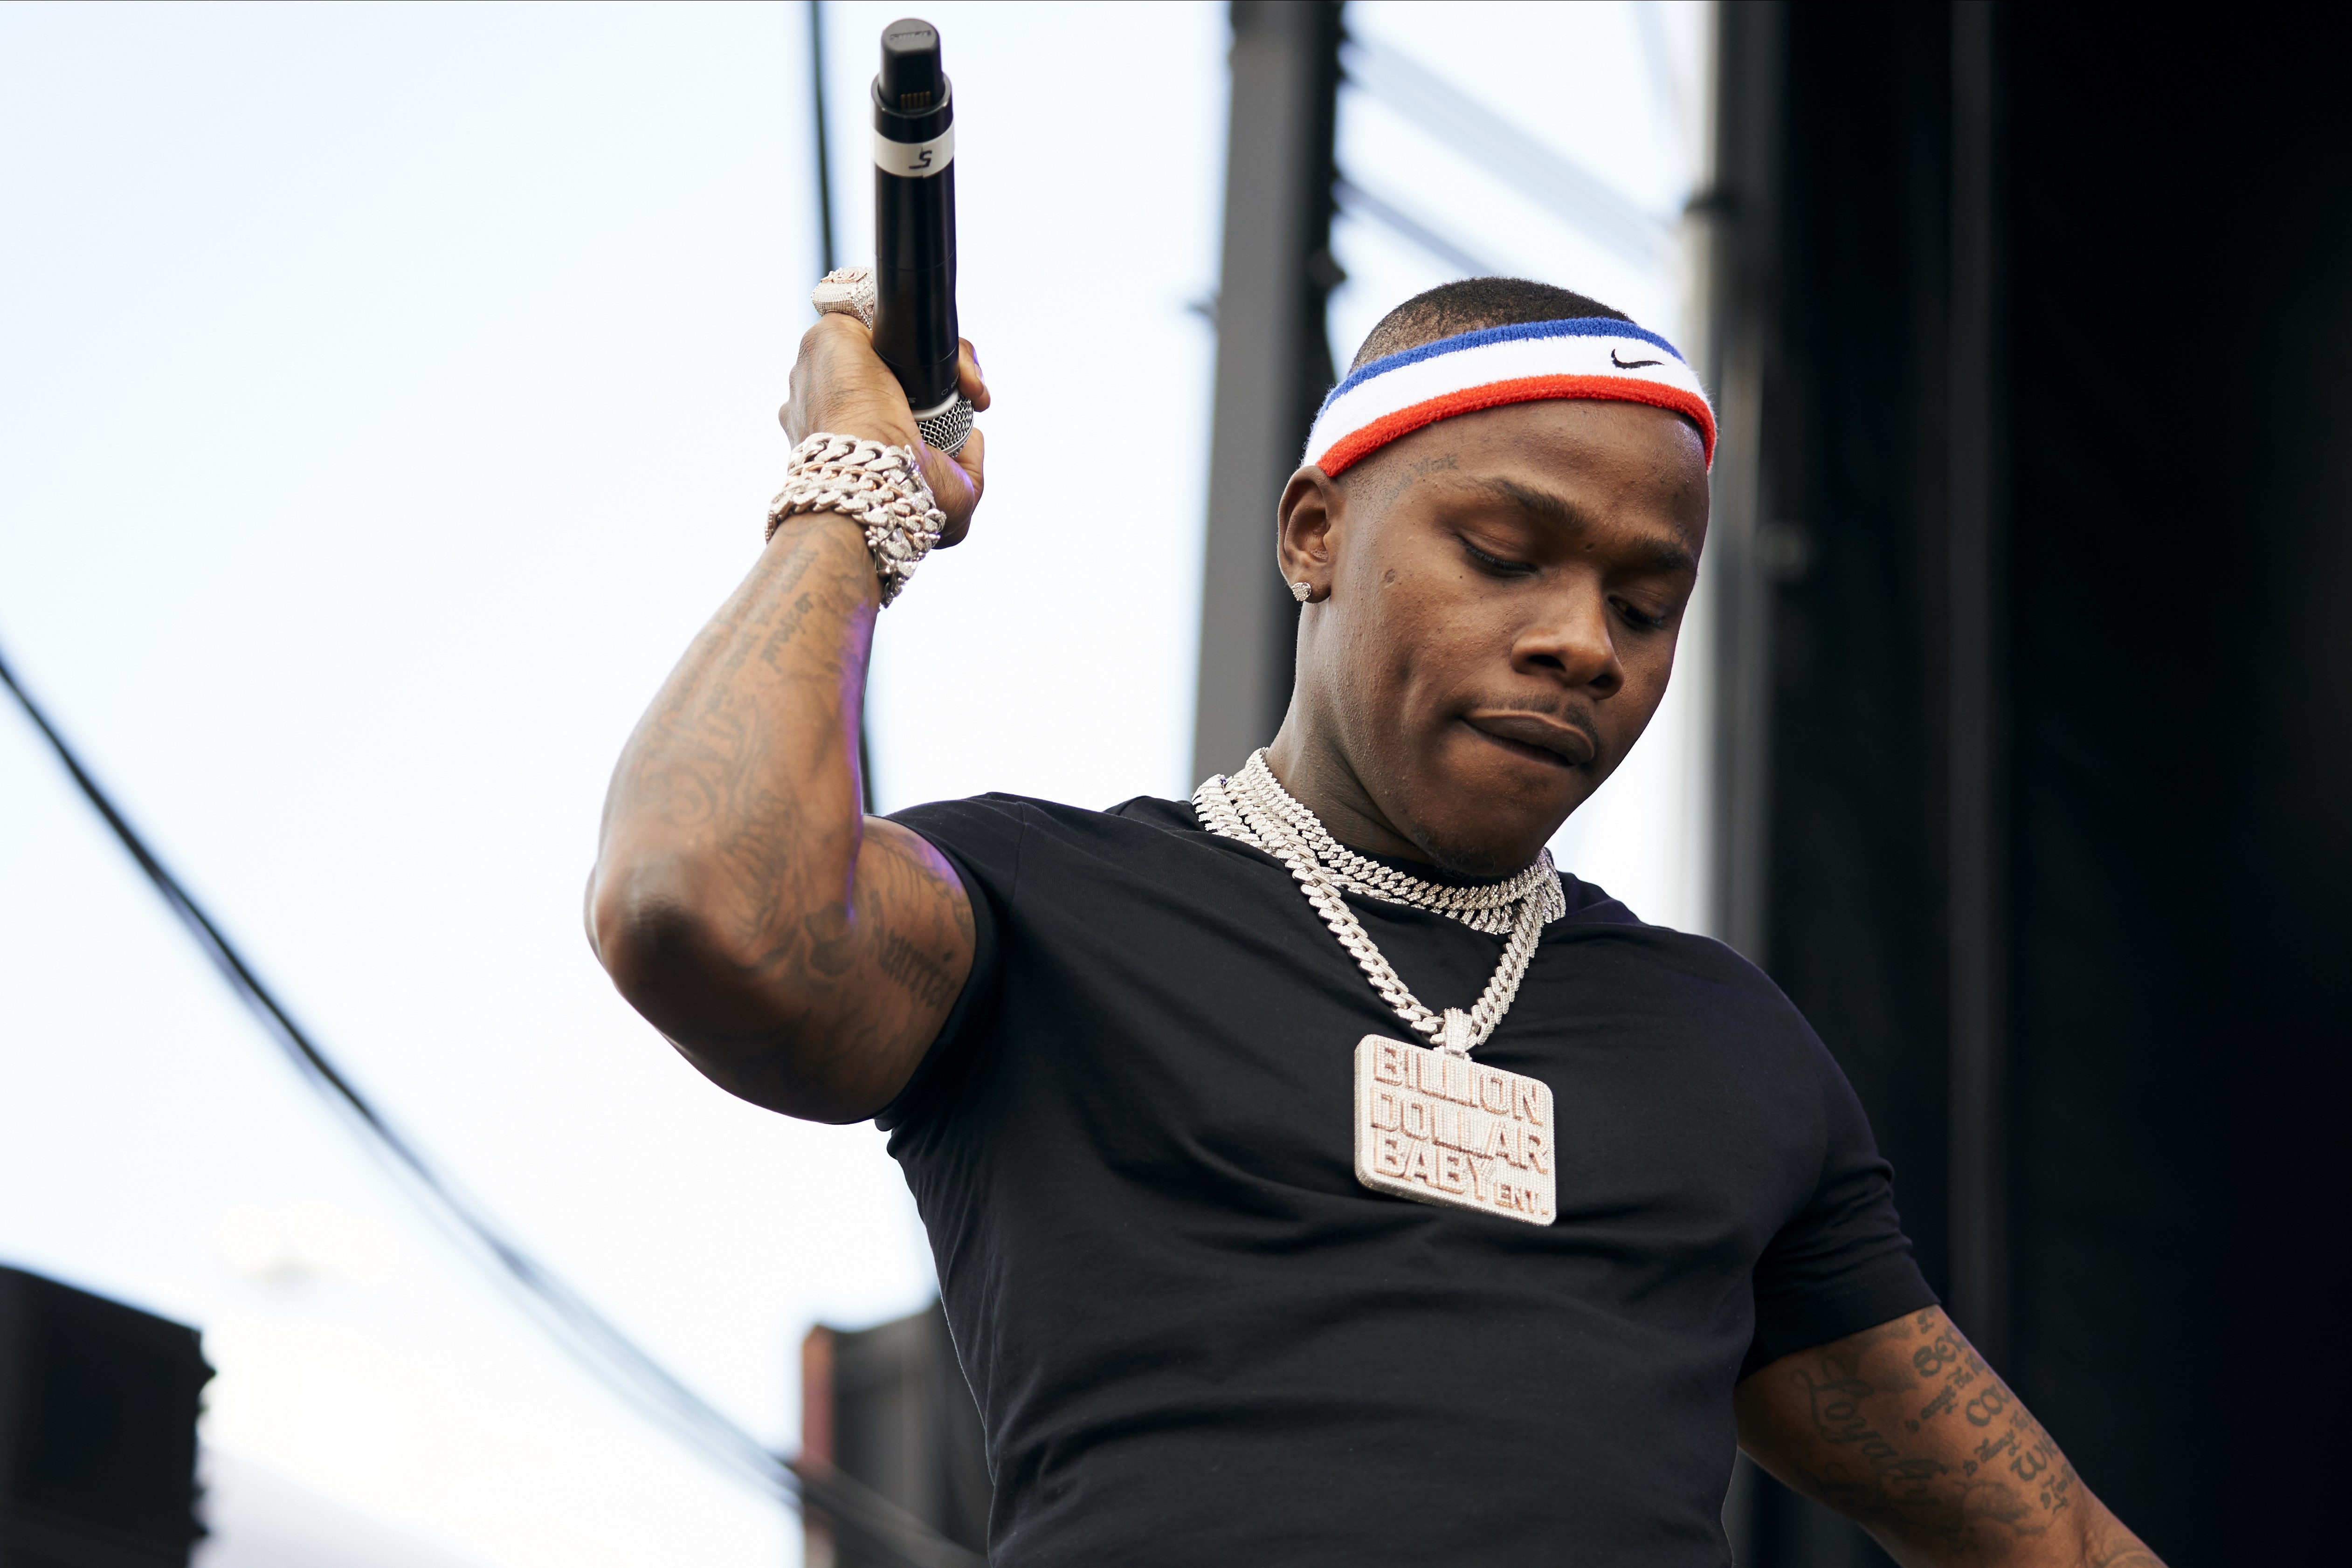 Dababy Suge Lyrics Spin It's like shmurda she wrote how much shmoneys that? spin